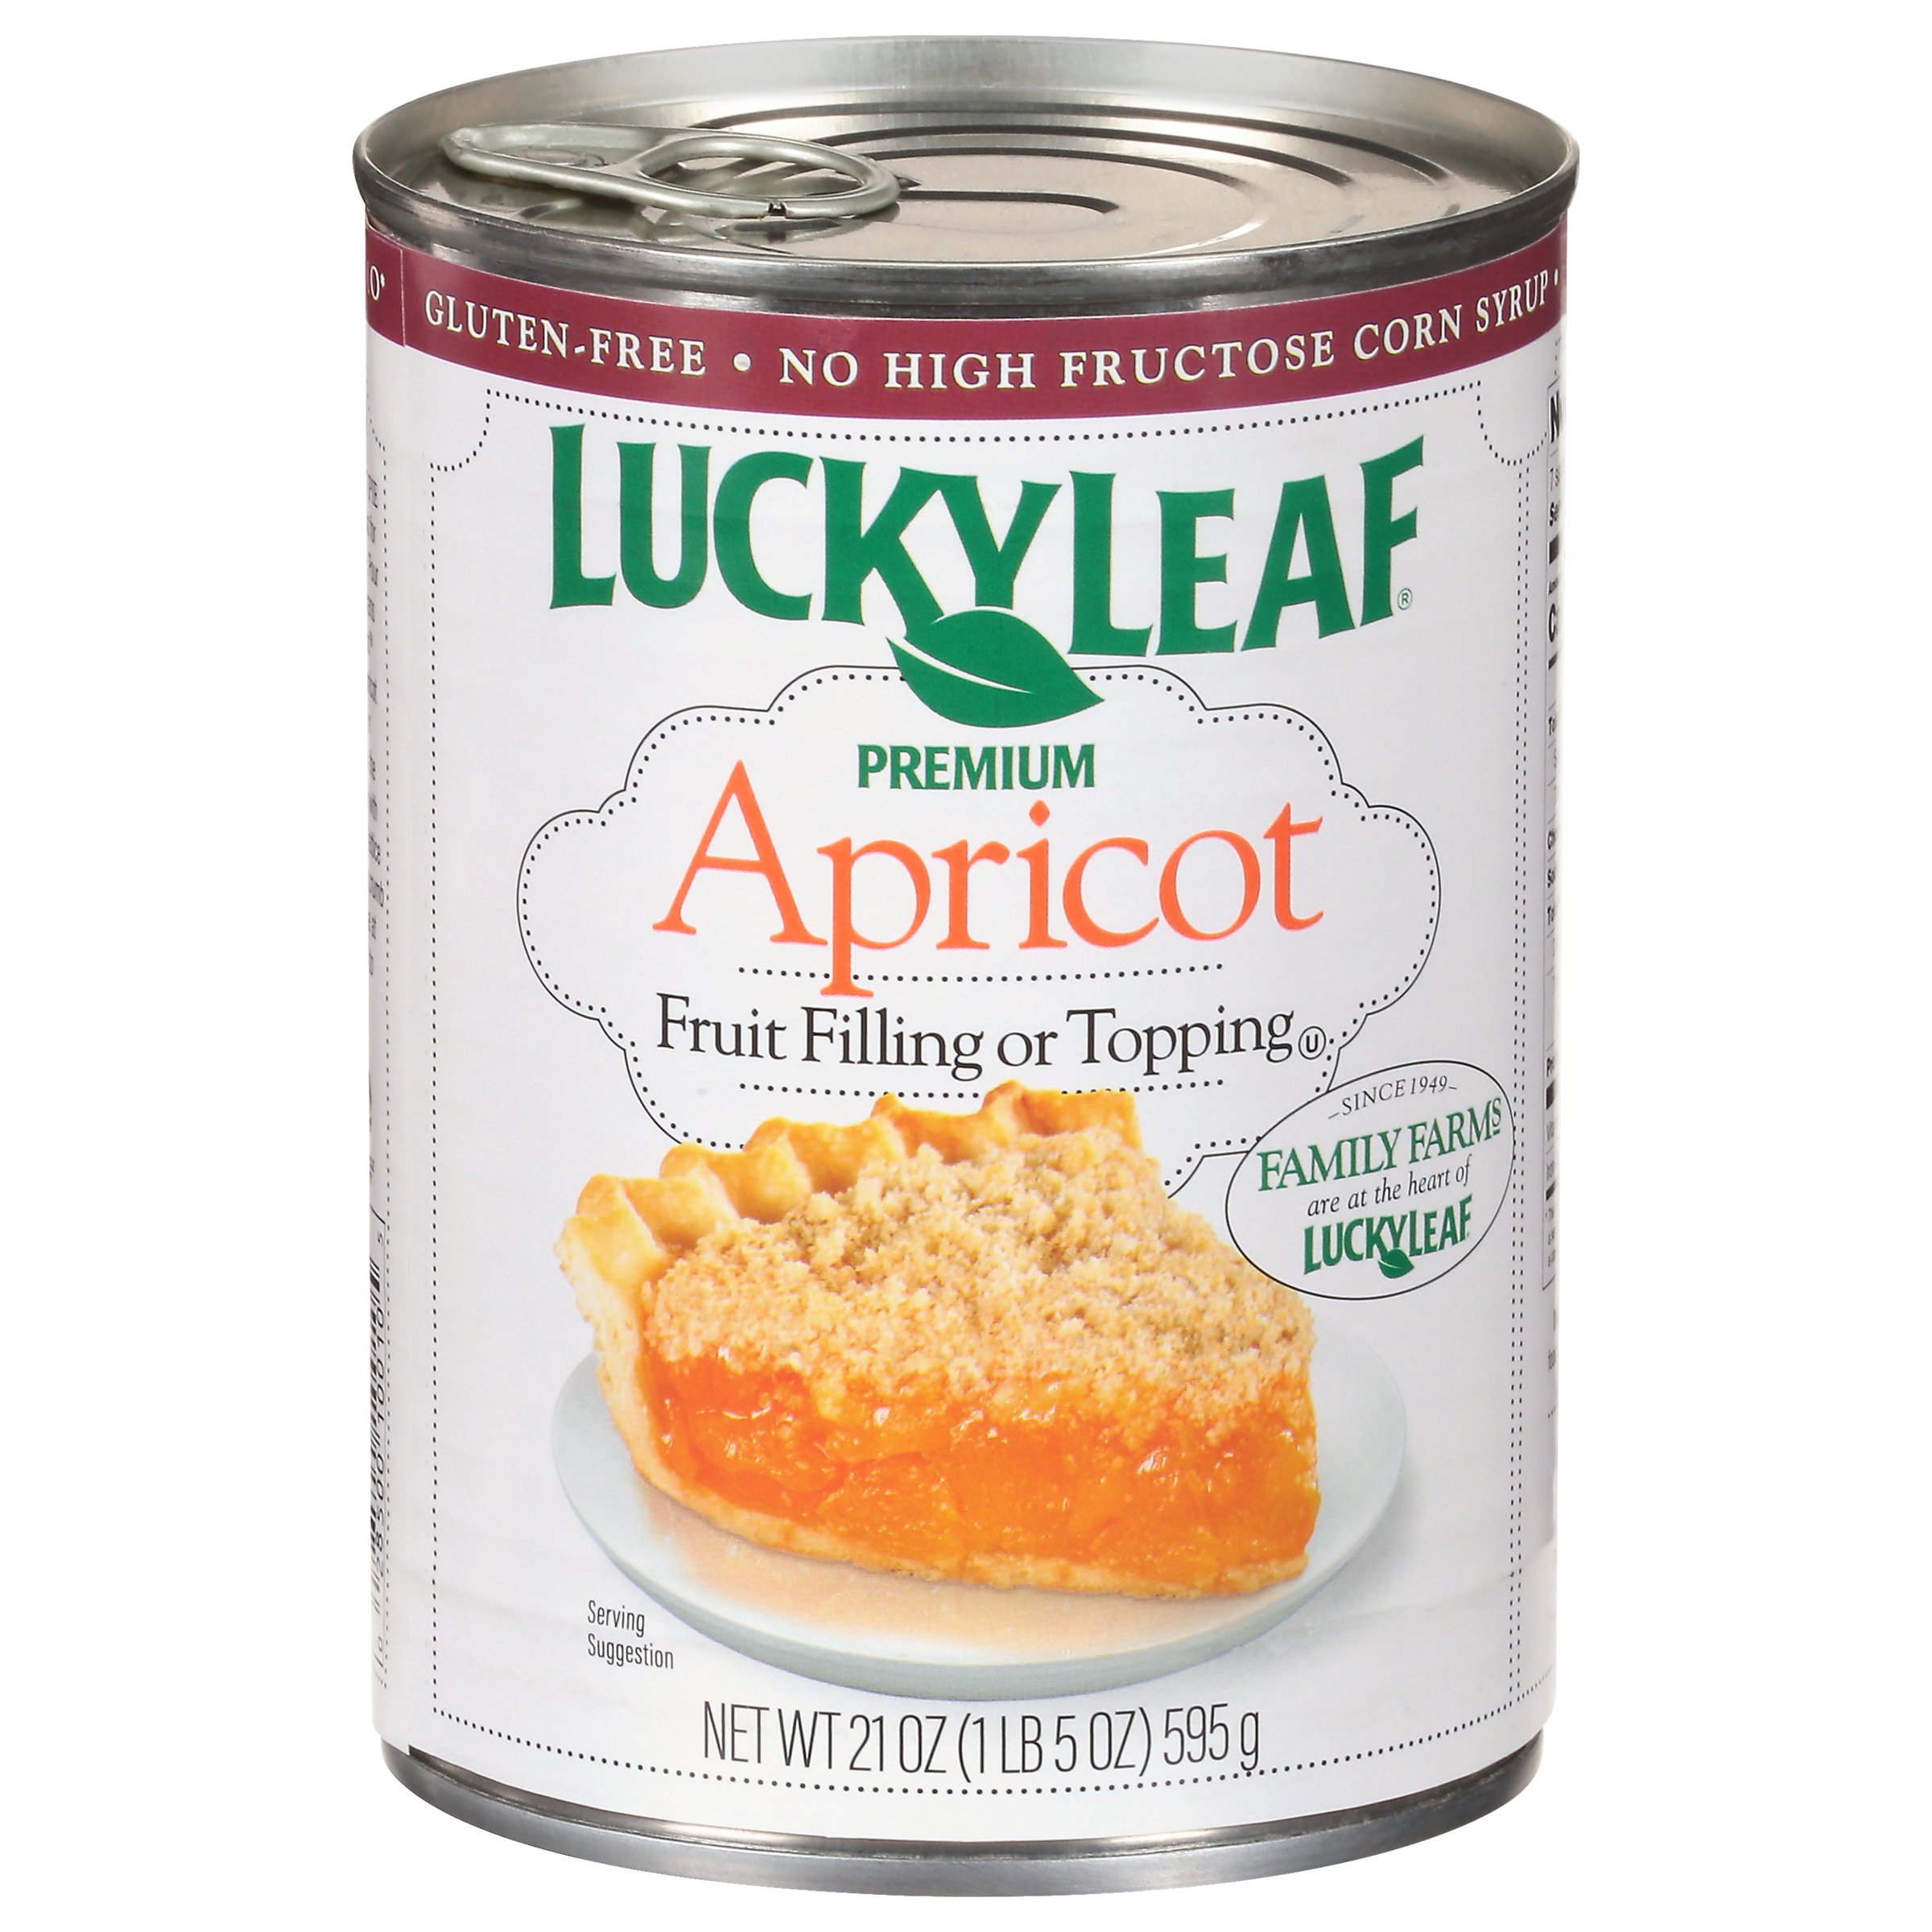 Lucky Leaf Apricot Pie Fruit Filling And Topping Shop Pie Filling At H E B